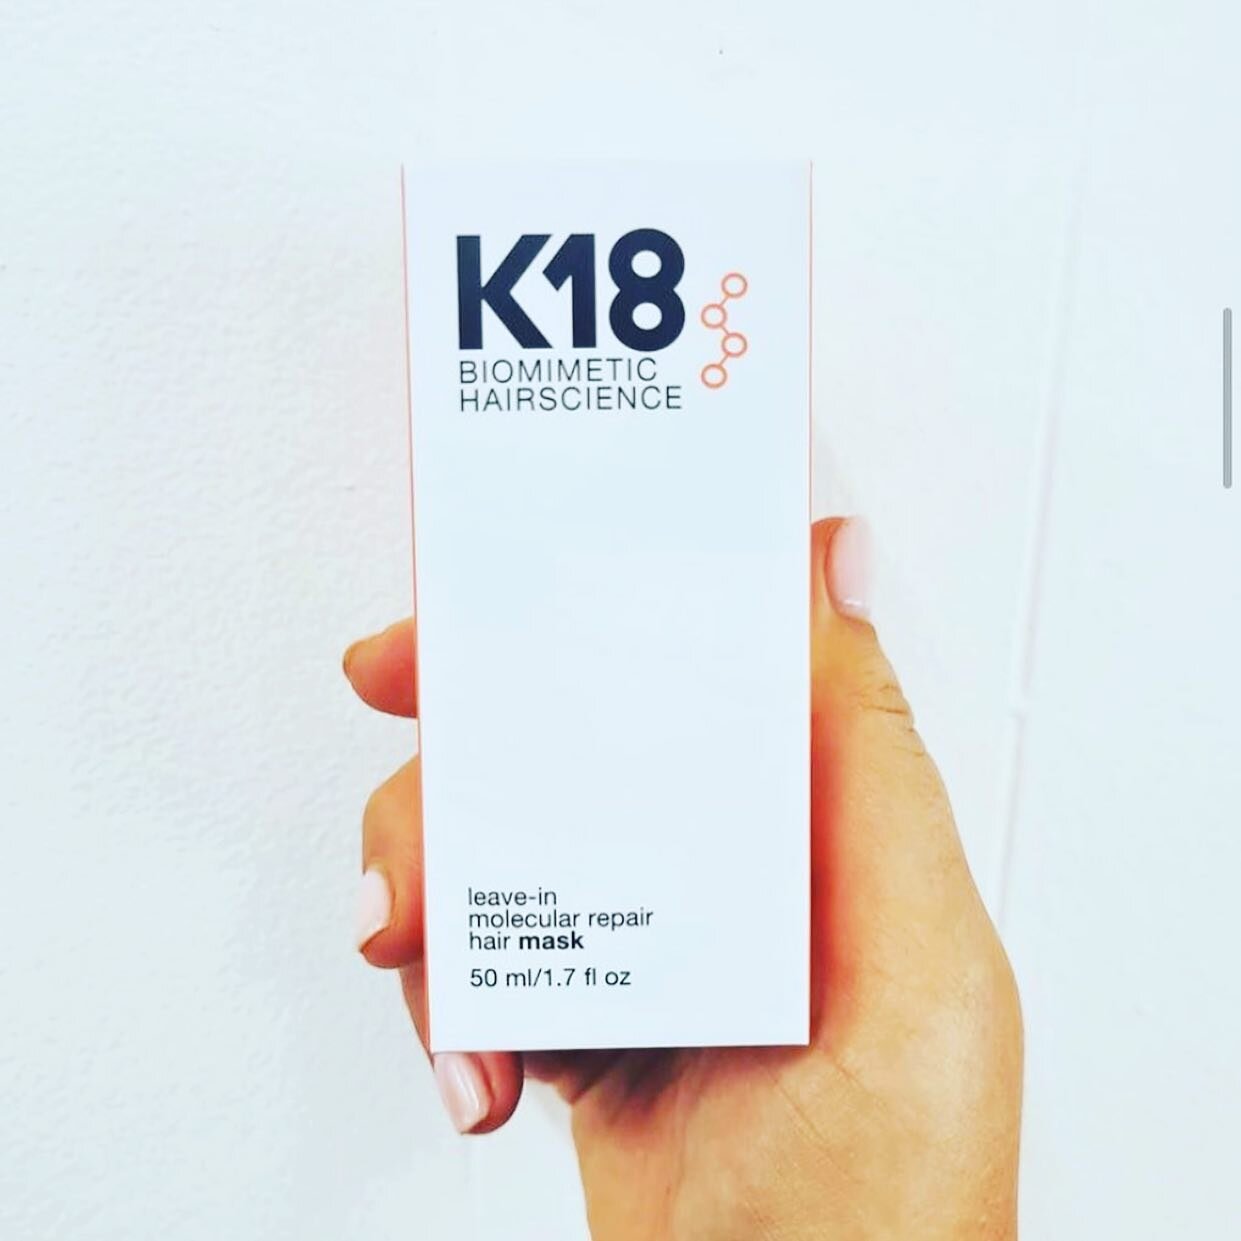 We had a fresh drop of K18 today 💕
Do you want👇🏼
&bull;blonder blonde
&bull;longer lasting colour
&bull;shiner
&bull;stronger
&bull;bouncier
&bull;revive your natural curls
K18 will restore your hair back to its youthful state✨
$94.95
I don&rsquo;